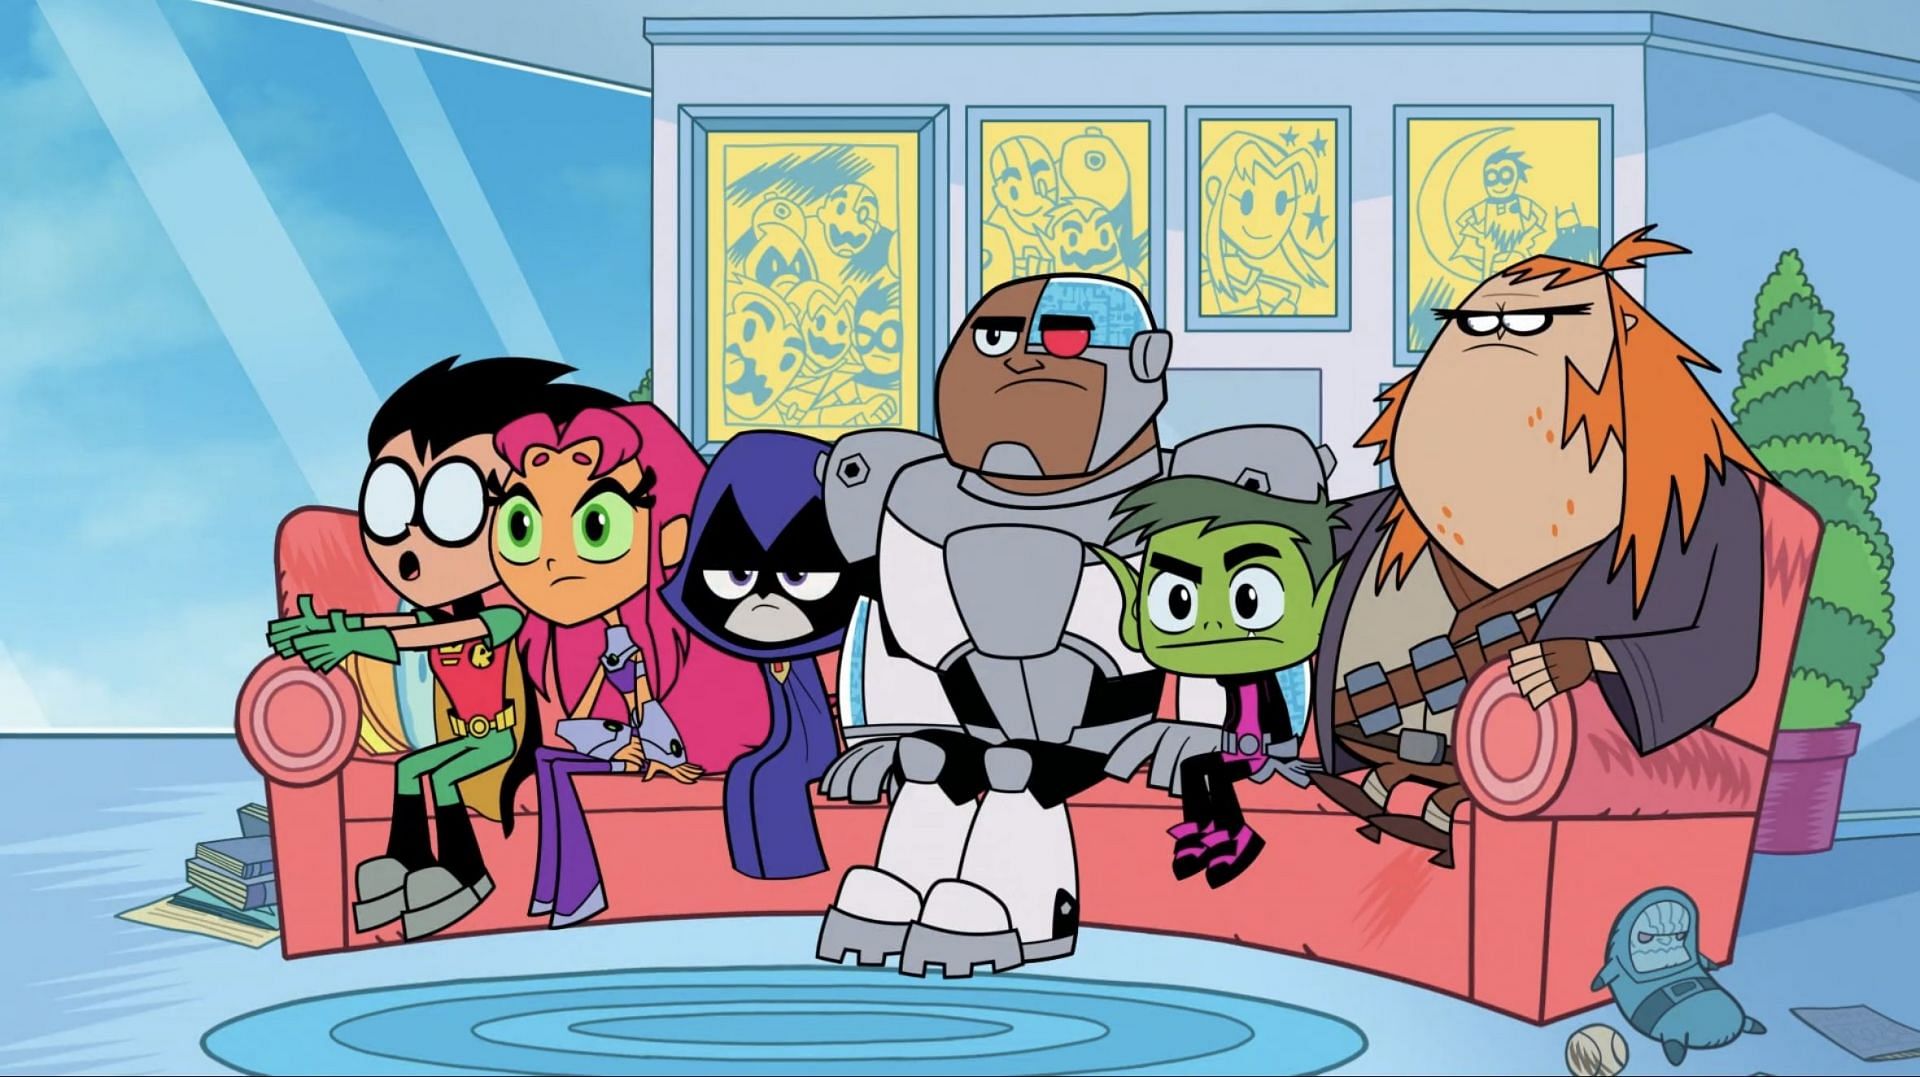 Teen Titans Go! and DC Super Hero Girls face off against